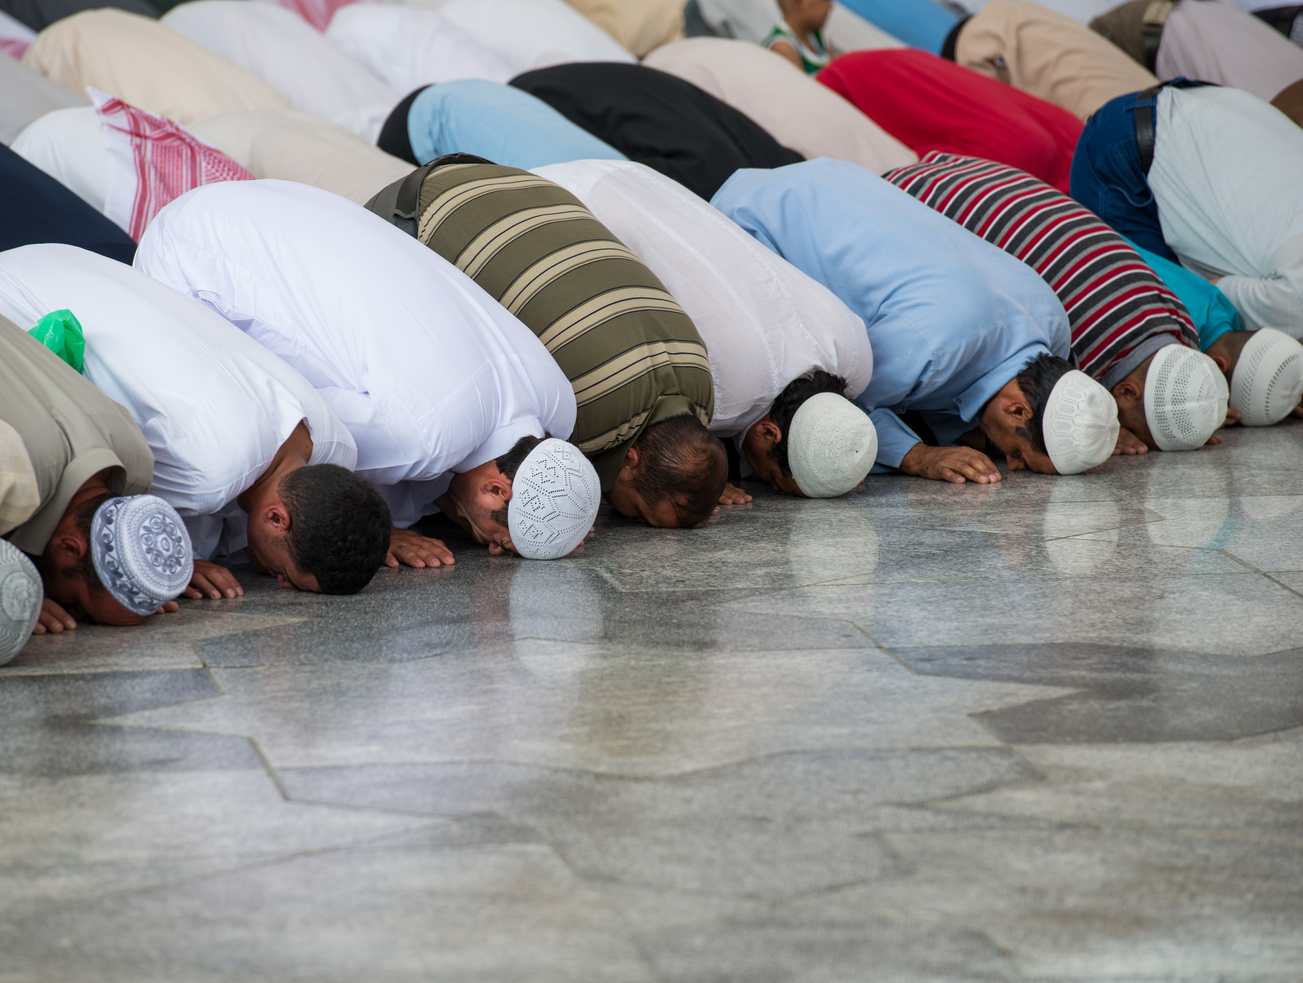 Muslims Praying Together in Mosque